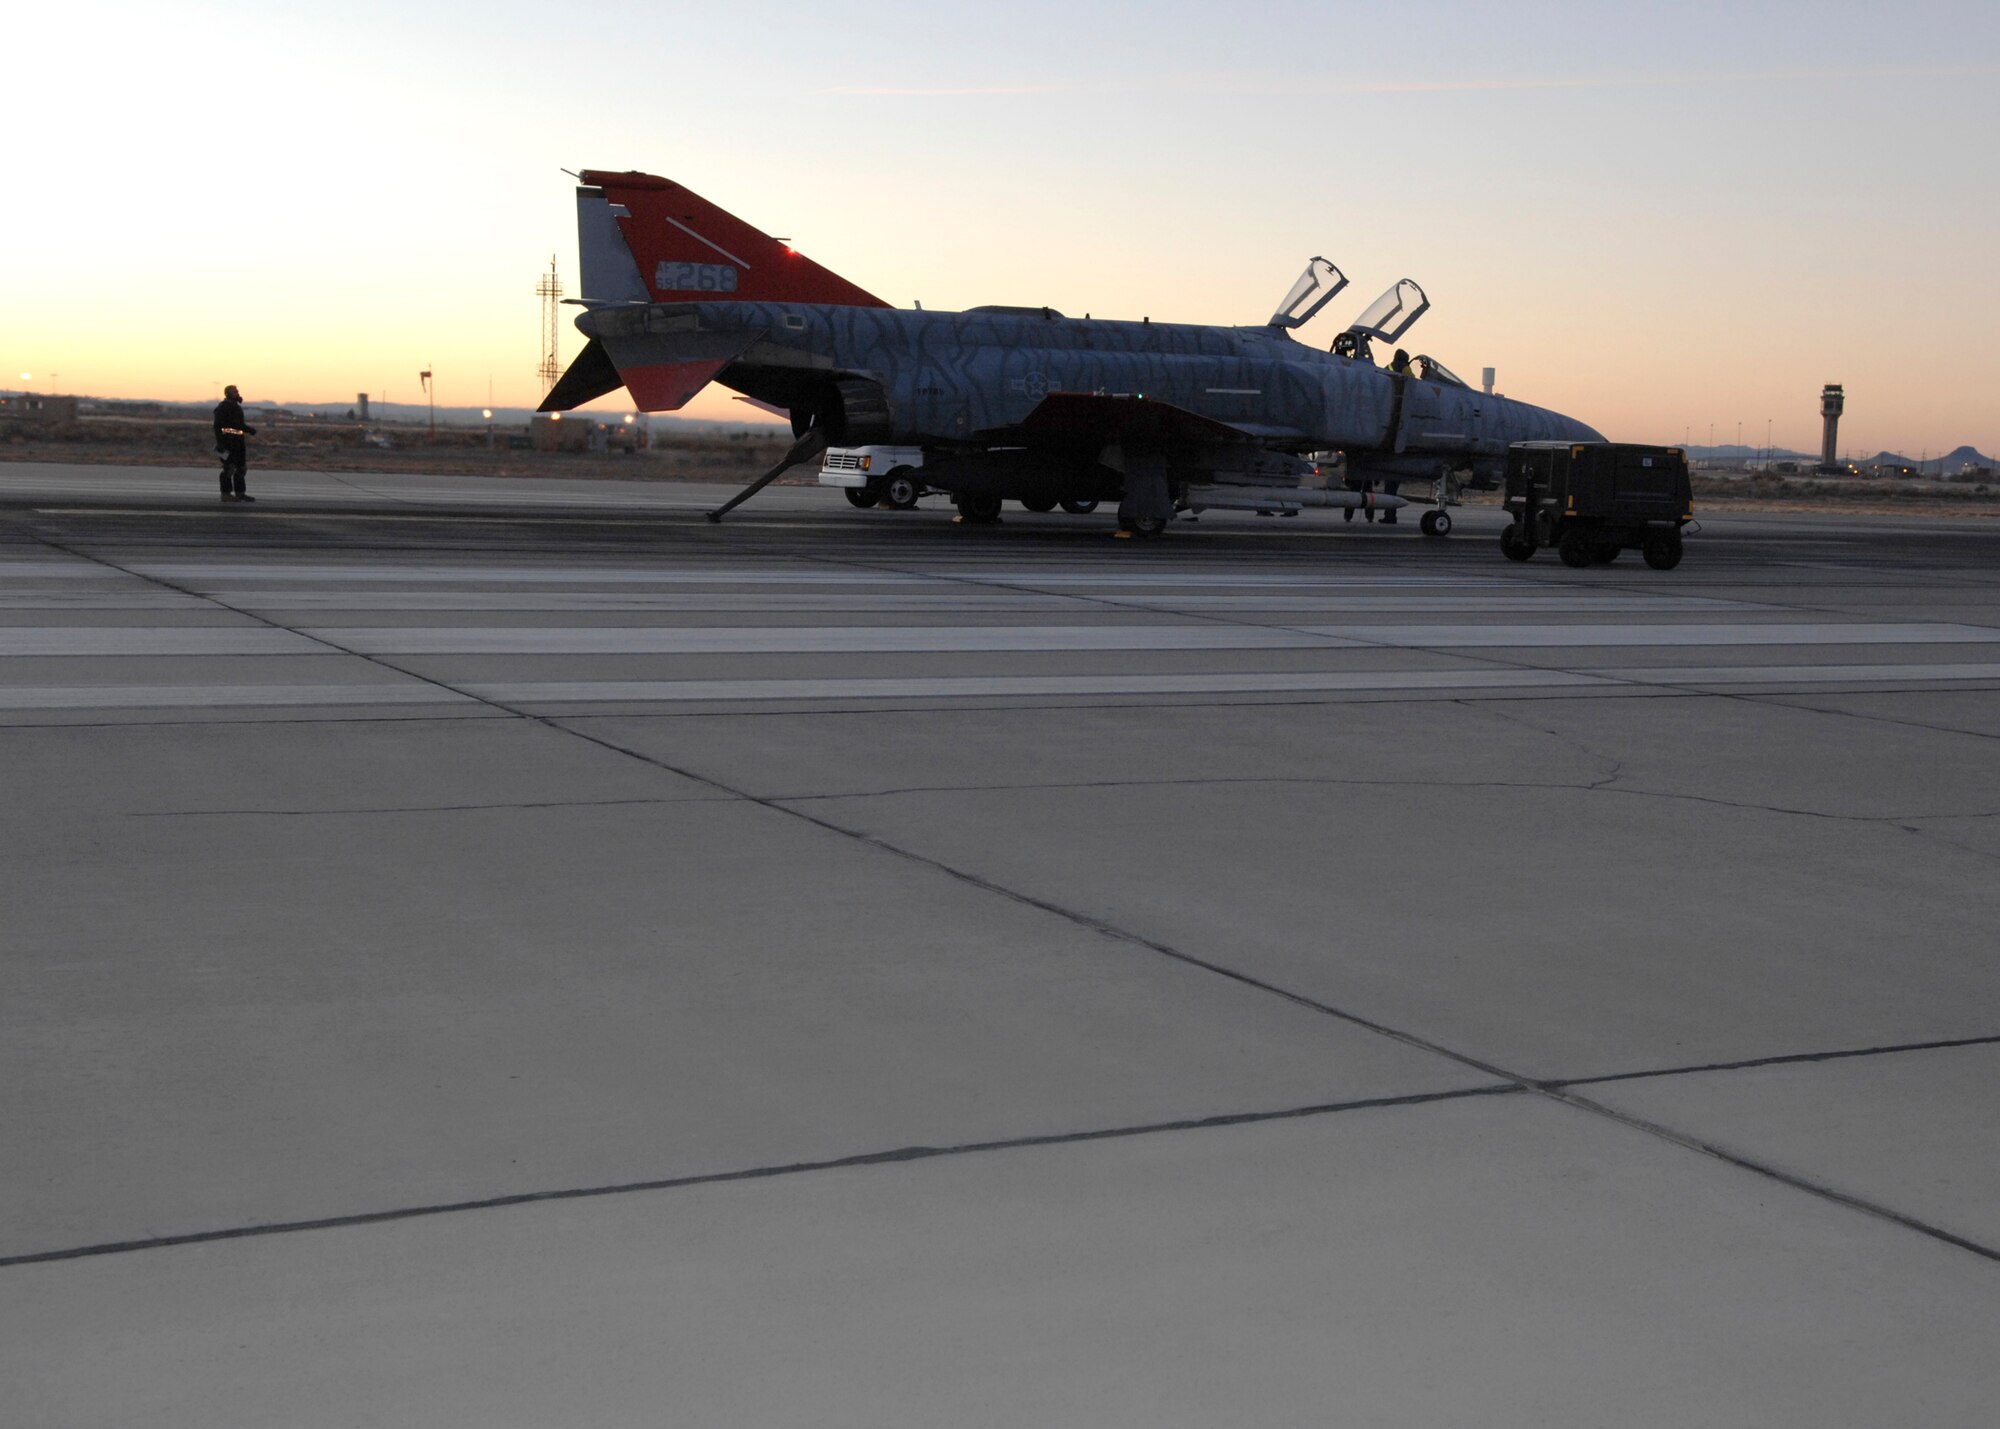 The QF-4 drone gets ready for launch on Holloman Air Force Base, N.M. on Jan. 09, 2008. This was the first air to ground missile fired off the unmanned drone. (U.S. Air Force photo/Airman 1st Class Rachel A. Kocin)